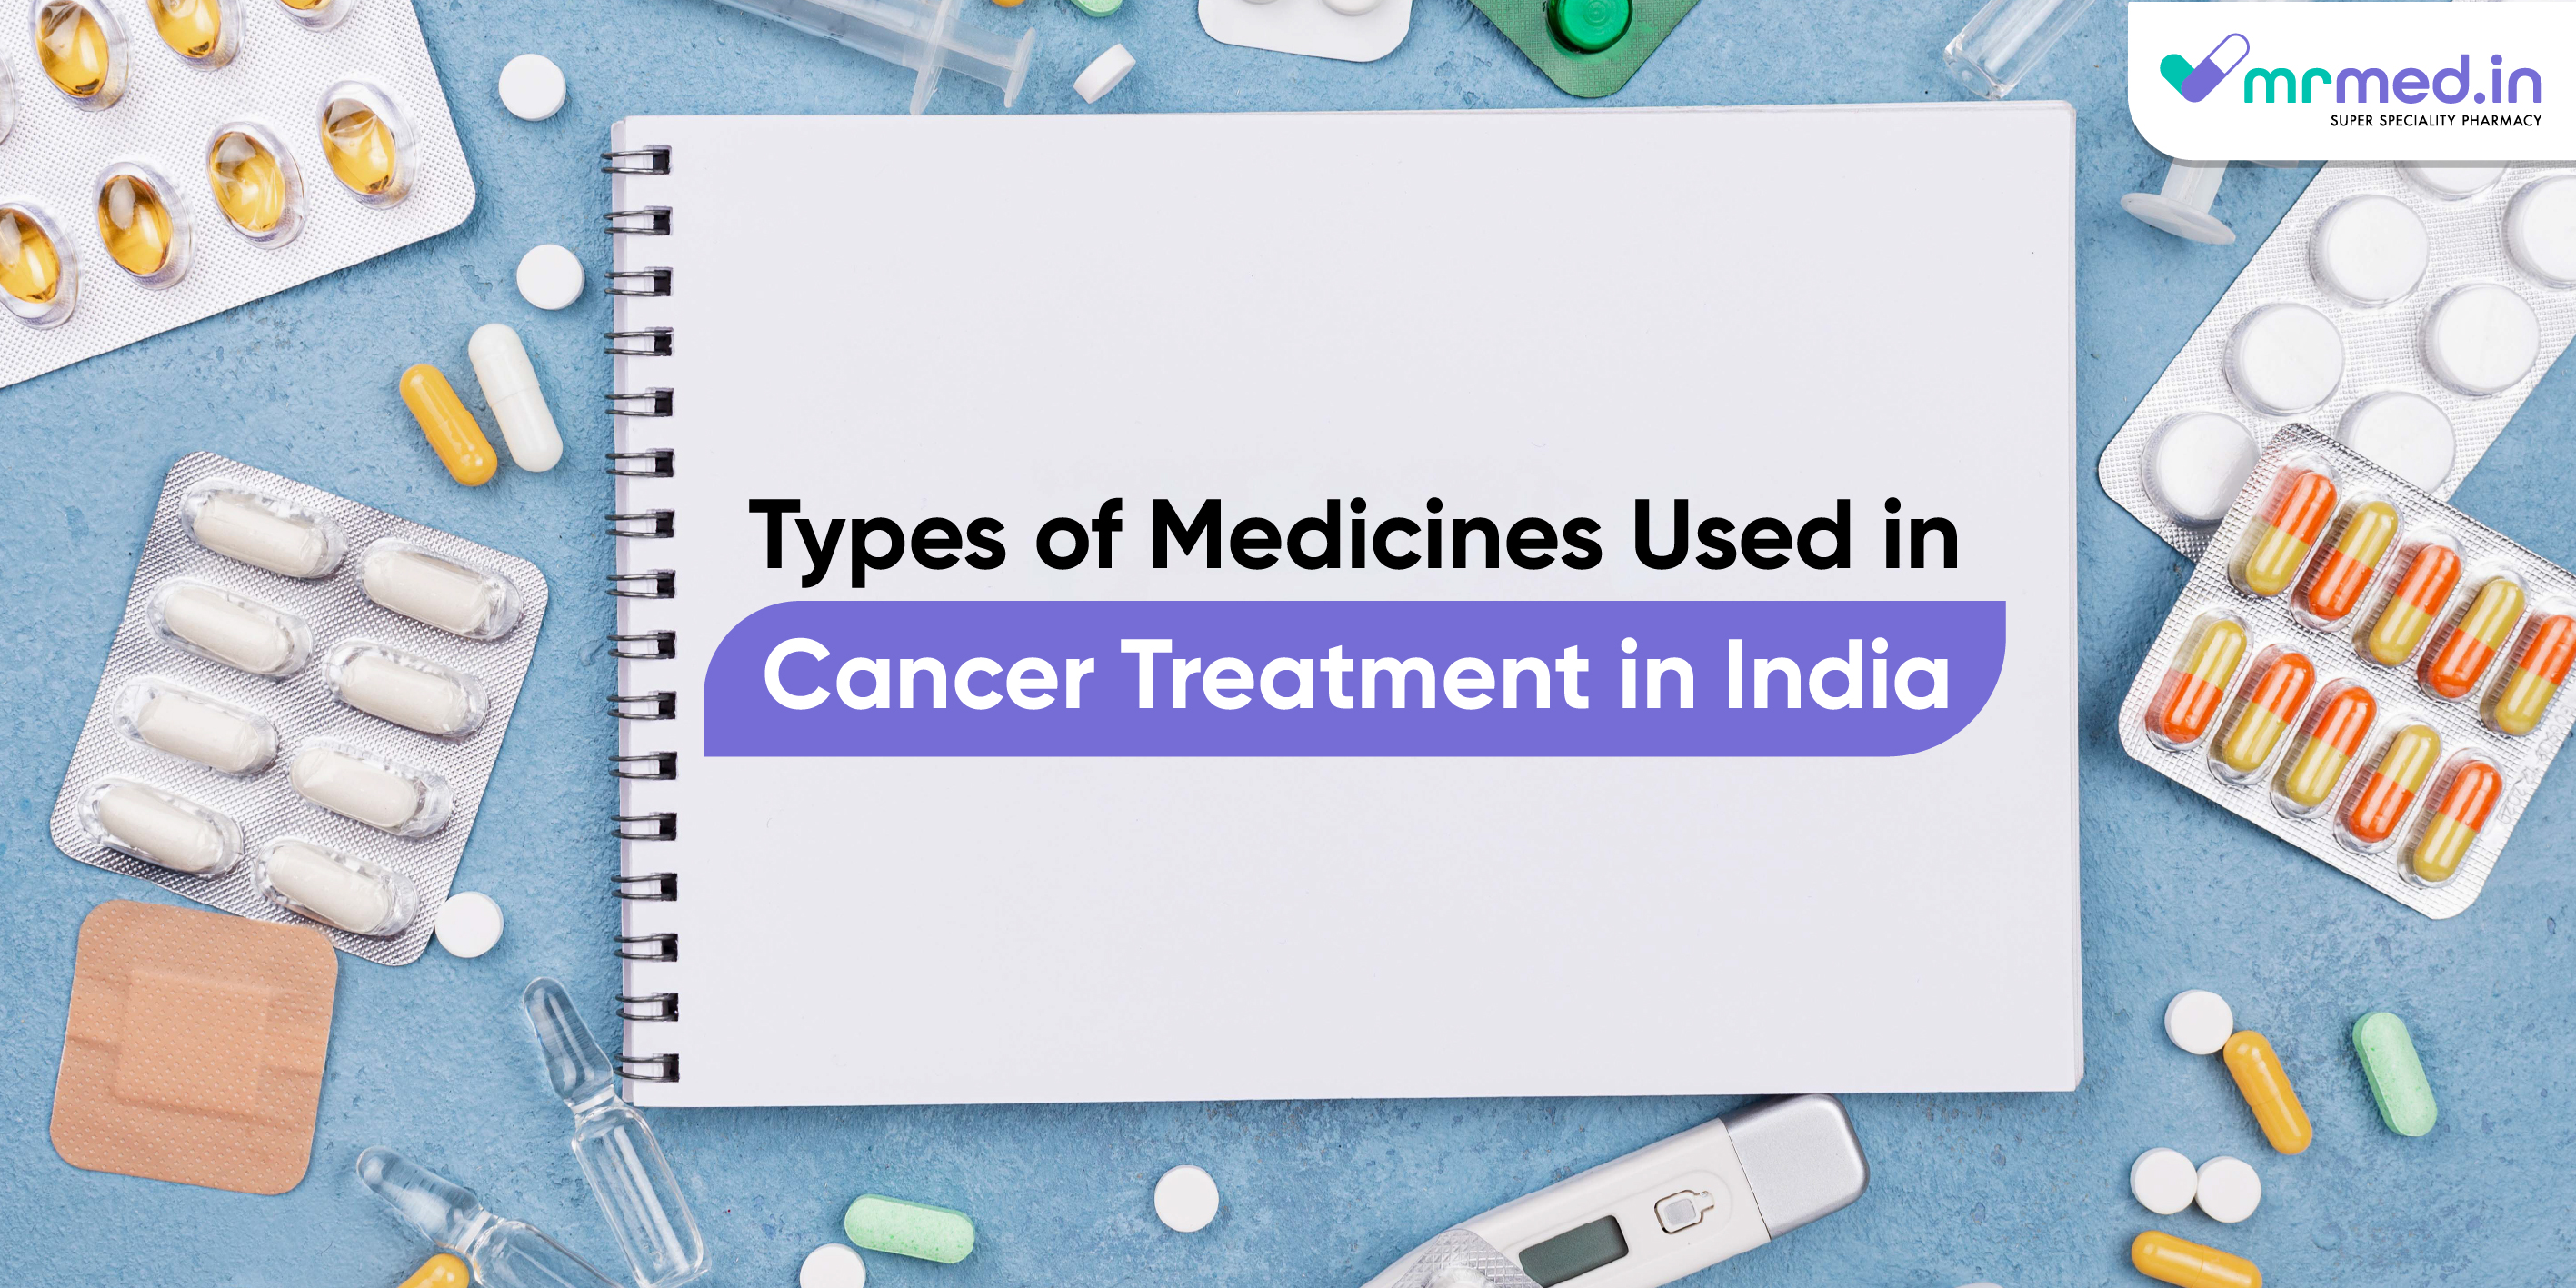 Types of Medicines Used in the Treatment of Cancer in India